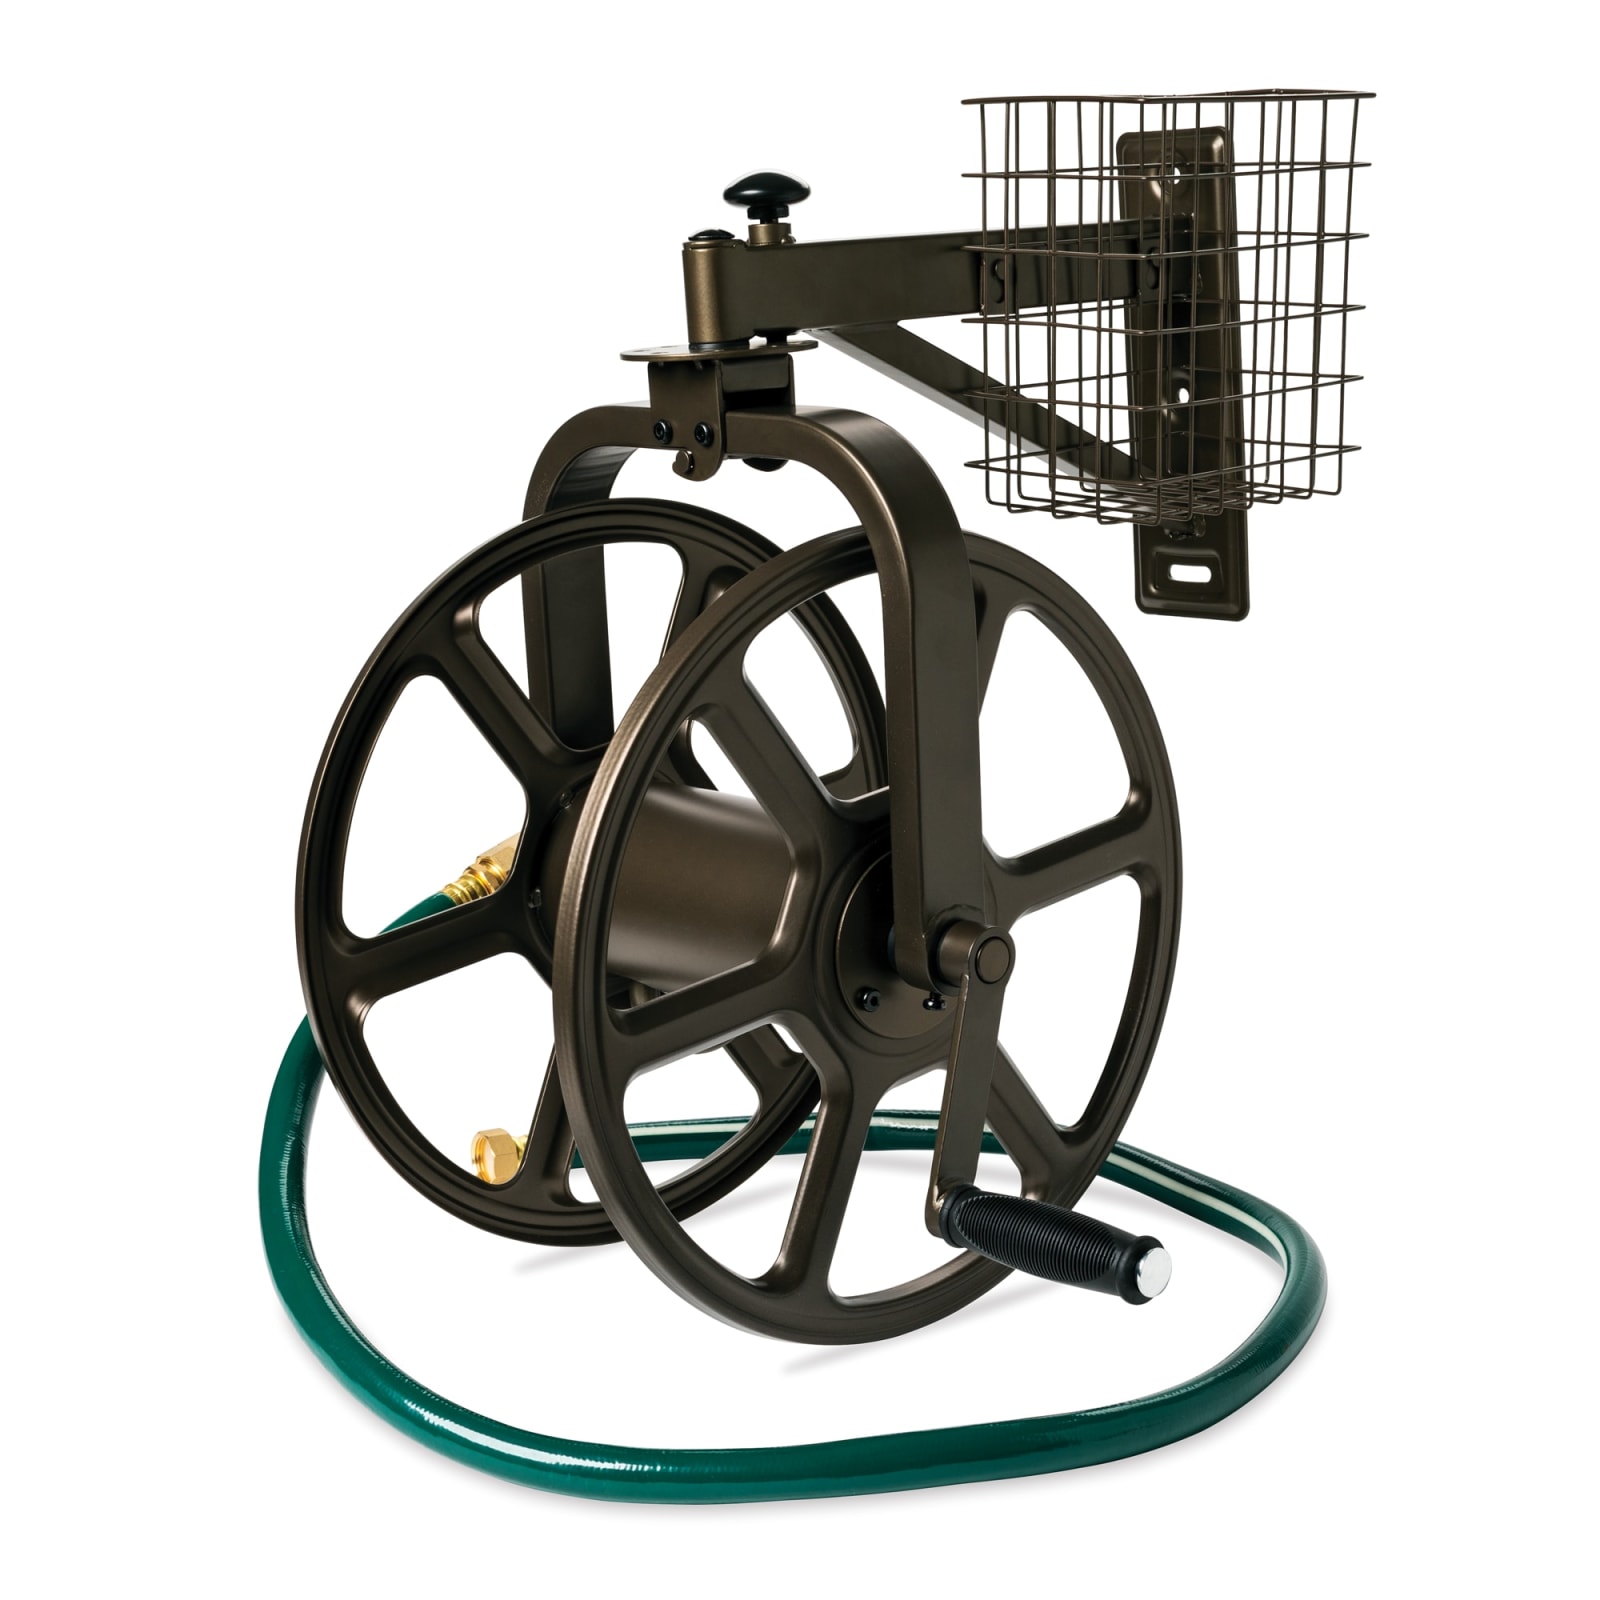 Every Garage Needs this Pressure Washer. 100 FOOT HOSE REEL